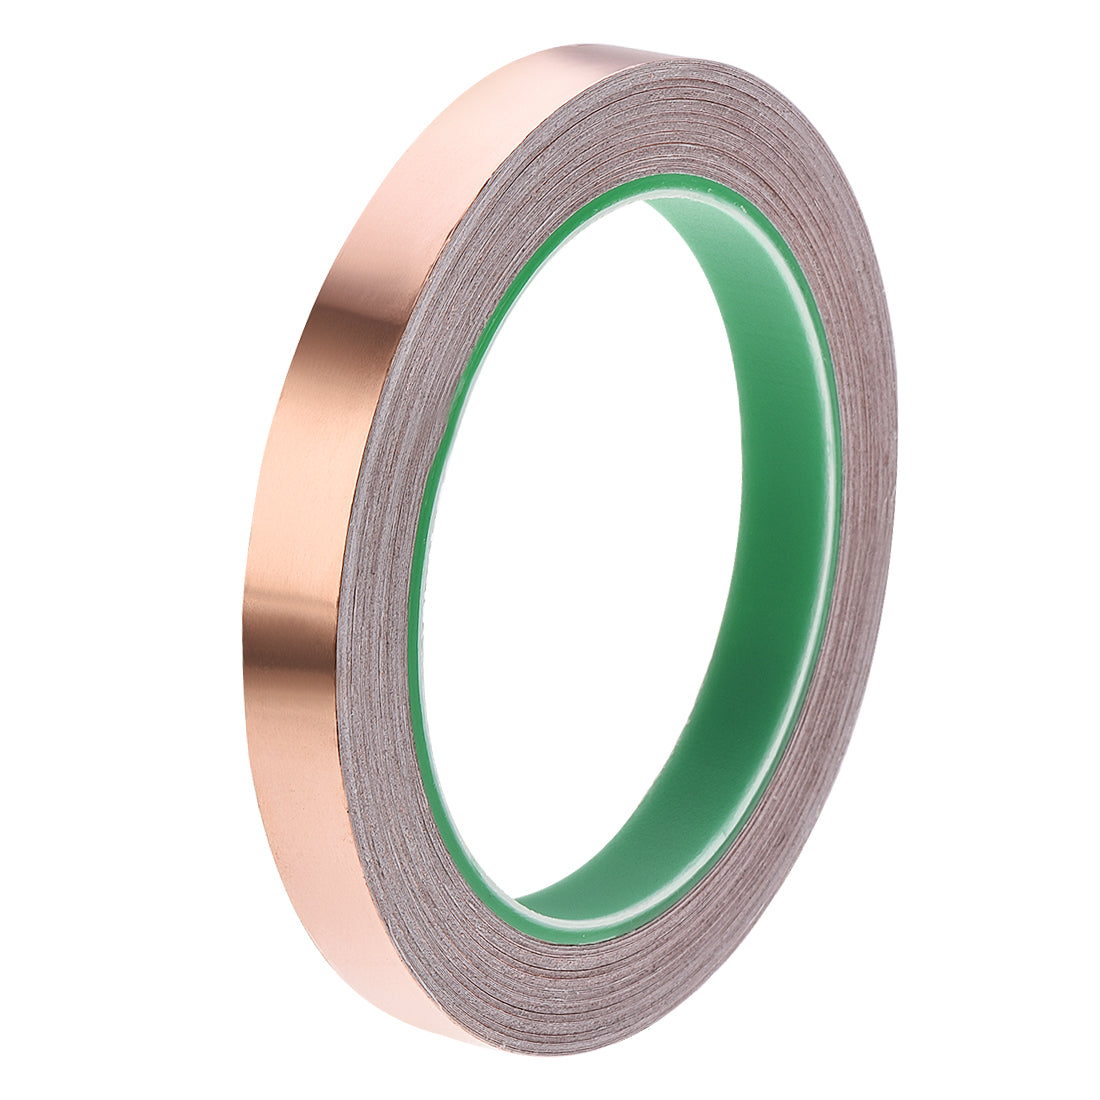 uxcell Uxcell Double Sided Conductive Tape Copper Foil Tape 12mm x 20m for EMI Shielding